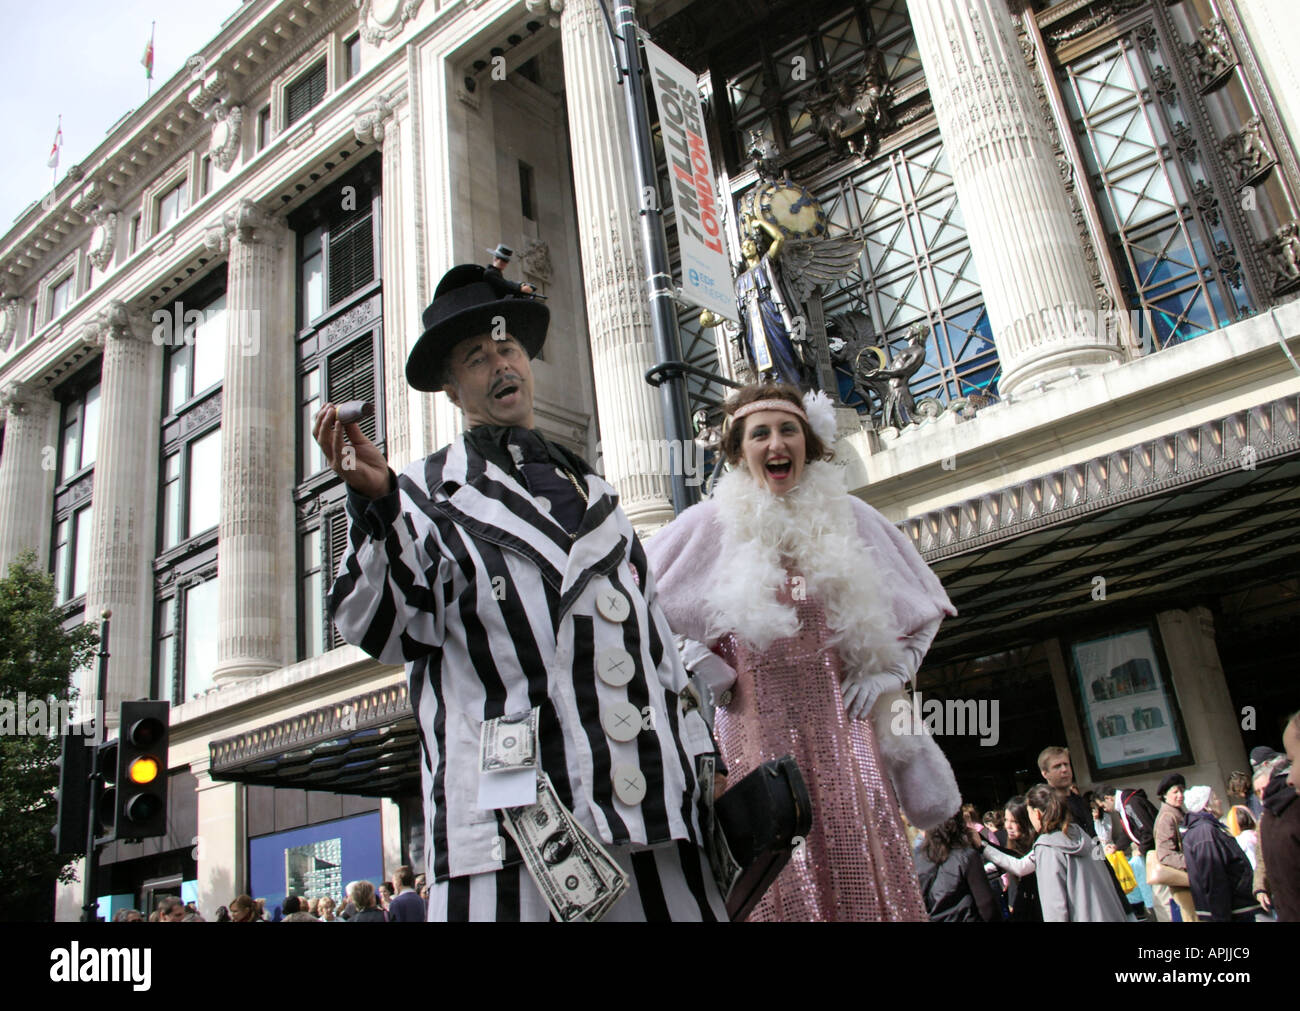 Performers on stilts in Oxford Street during the Dress to Impress event on Octoder 2005 Stock Photo